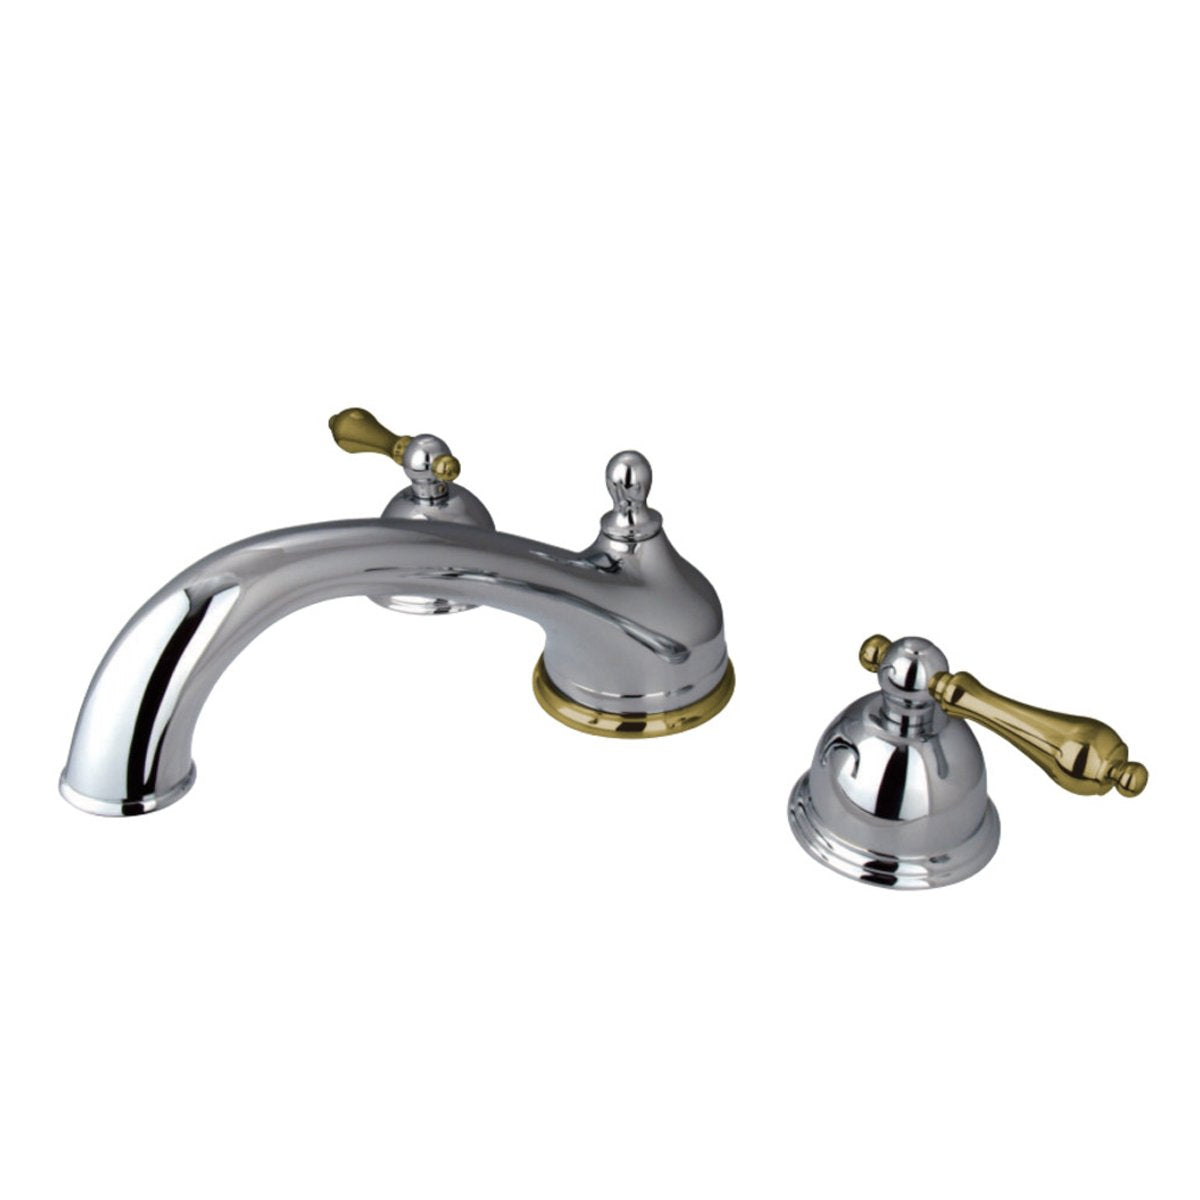 Kingston Brass Vintage Roman Tub Faucet in Polished Chrome and Polished Brass